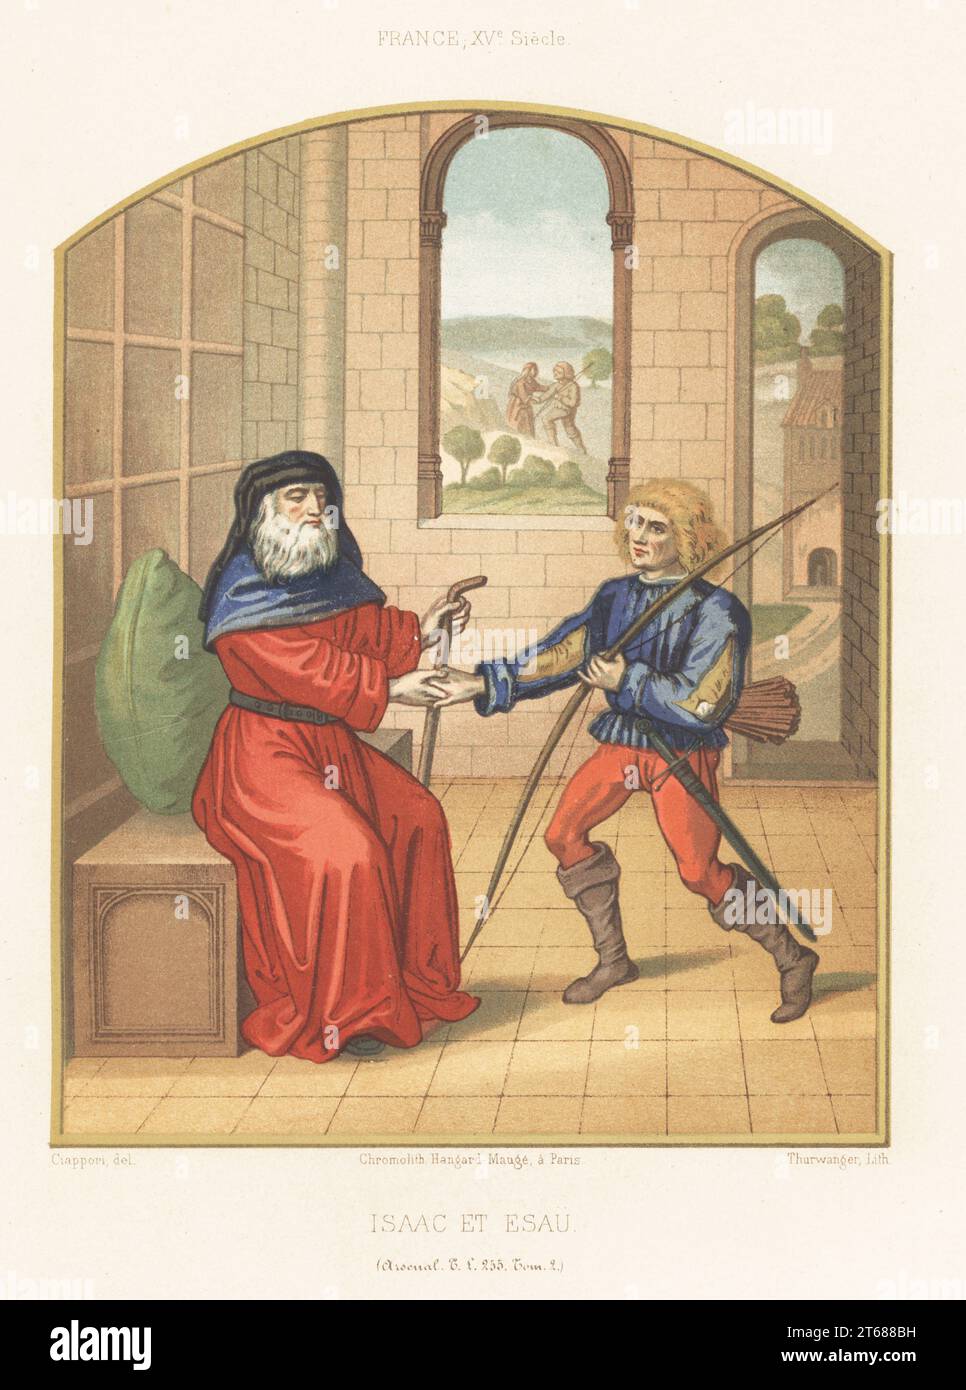 Isaac and his son Esau in 15th century French costume. Esau dressed as a hunter, in doublet, hose and boots with bow, quiver and sword. Isaac et Esau. XVe siecle. Taken from a Book of Hours, livre d'heures, MS Tl 255, Tom. 2, Bibliotheque de l'Arsenal. Chromolithograph by Thurwanger after an illustration by Claudius Joseph Ciappori from Charles Louandres Les Arts Somptuaires, The Sumptuary Arts, Hangard-Mauge, Paris, 1858. Stock Photo